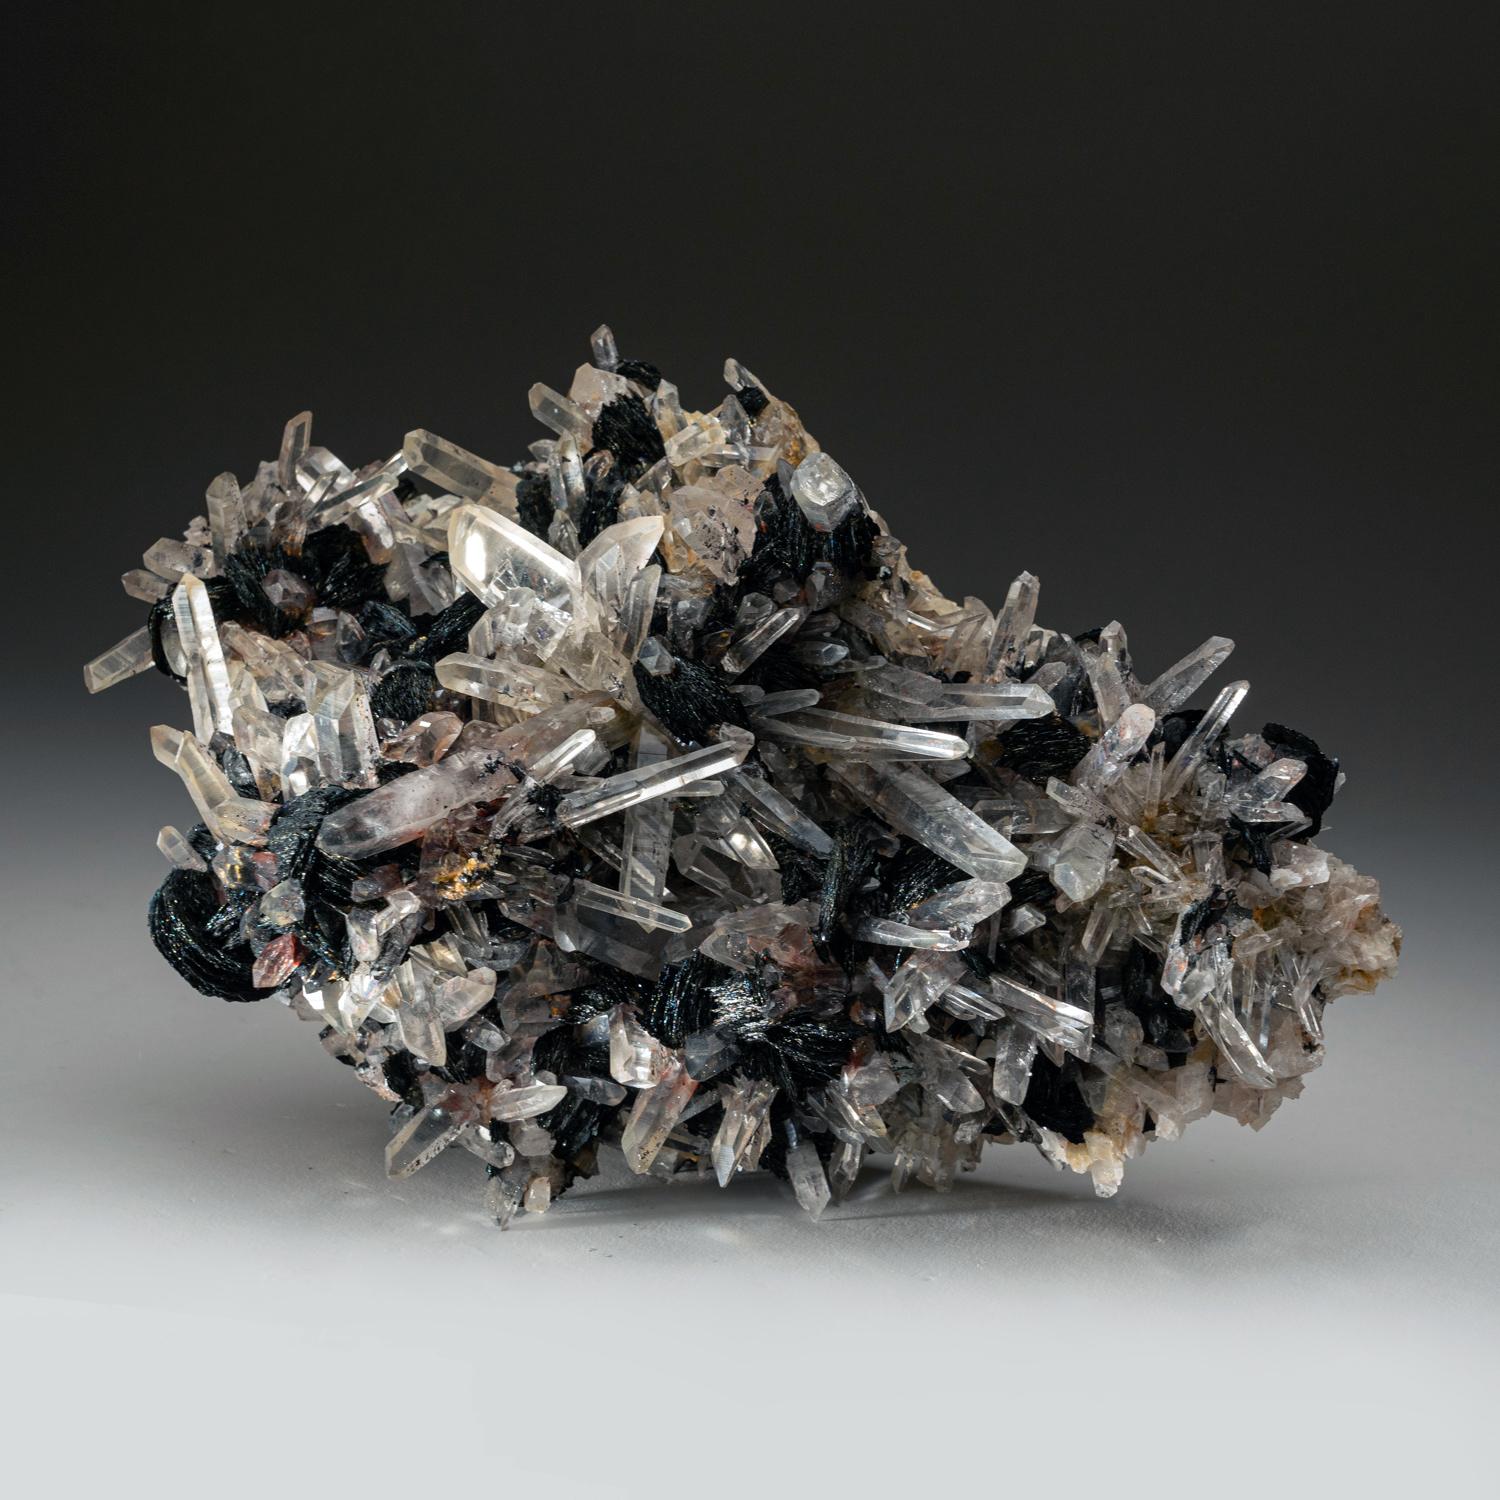 From Jinlong, northeast of Guangzhou, Longchuan, Guangdong Province, China

Large intersecting cluster of gem transparent terminated quartz crystals with bladed black-metallic hematite rosettes nestled between crystals. There's a large well